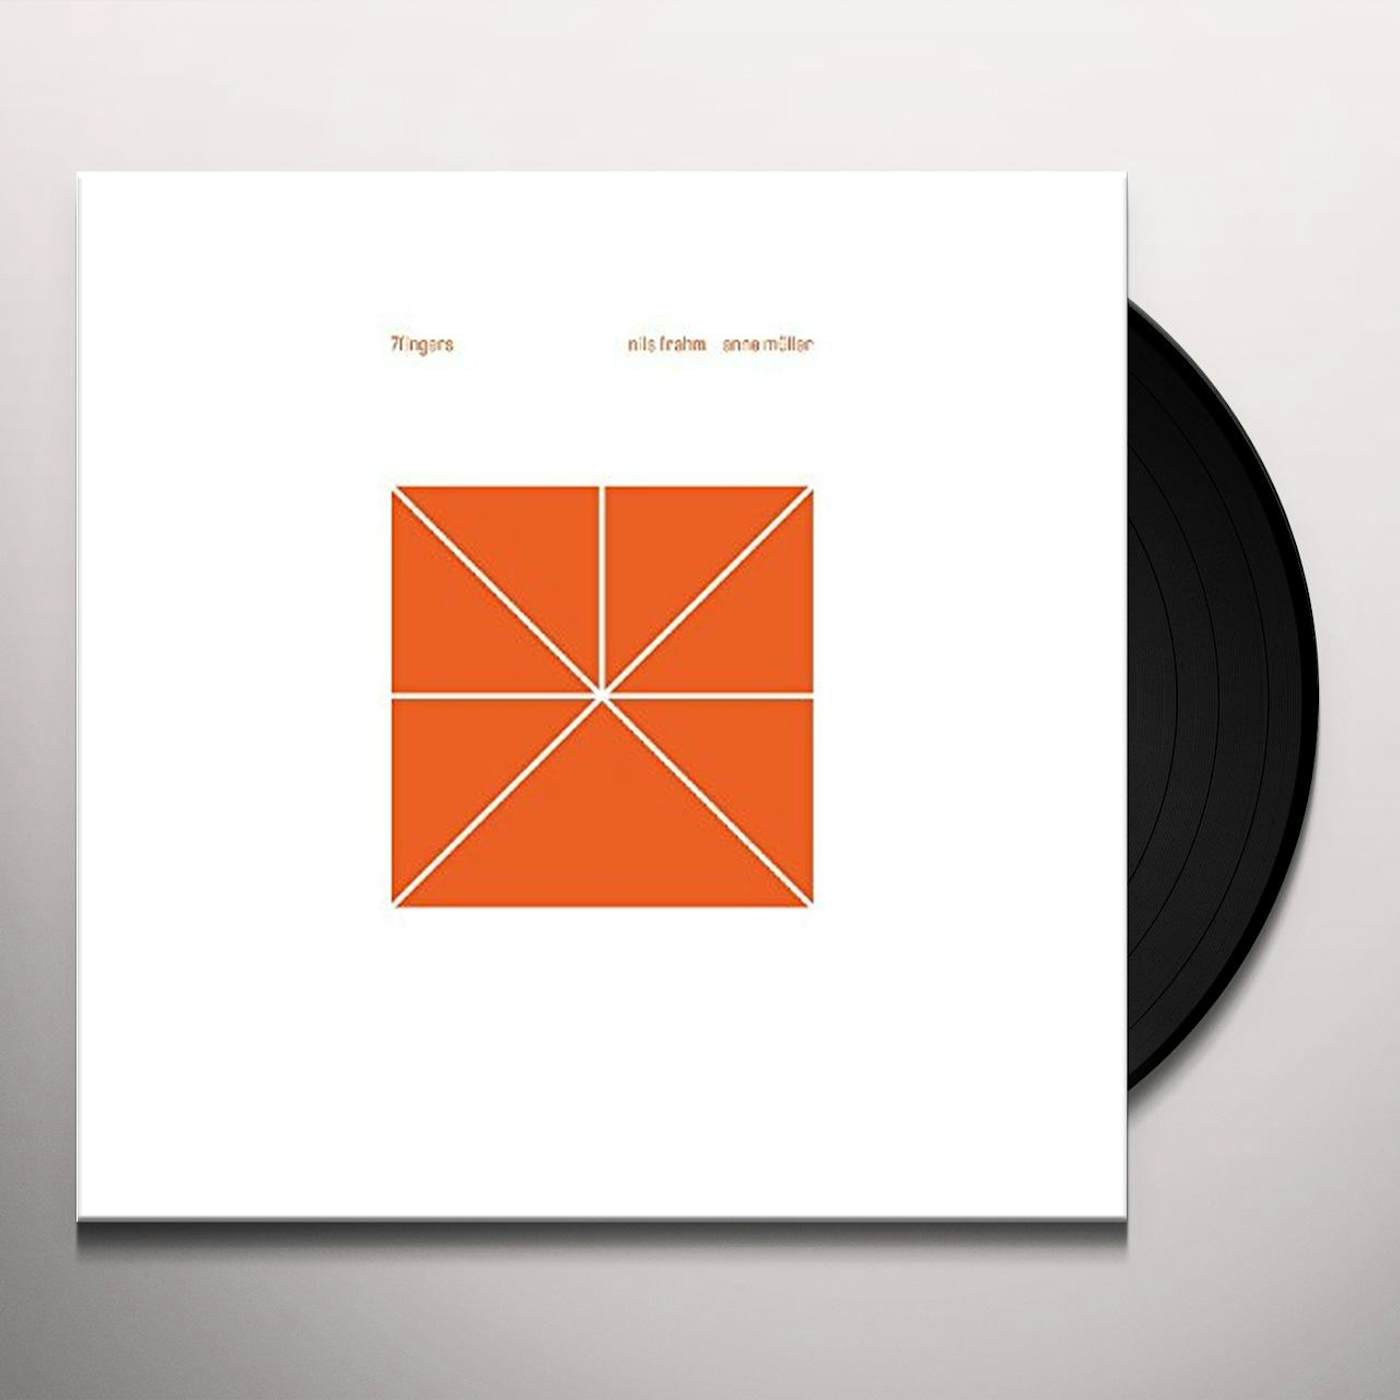 Nils Frahm And Anne Müller 7fingers Vinyl Record